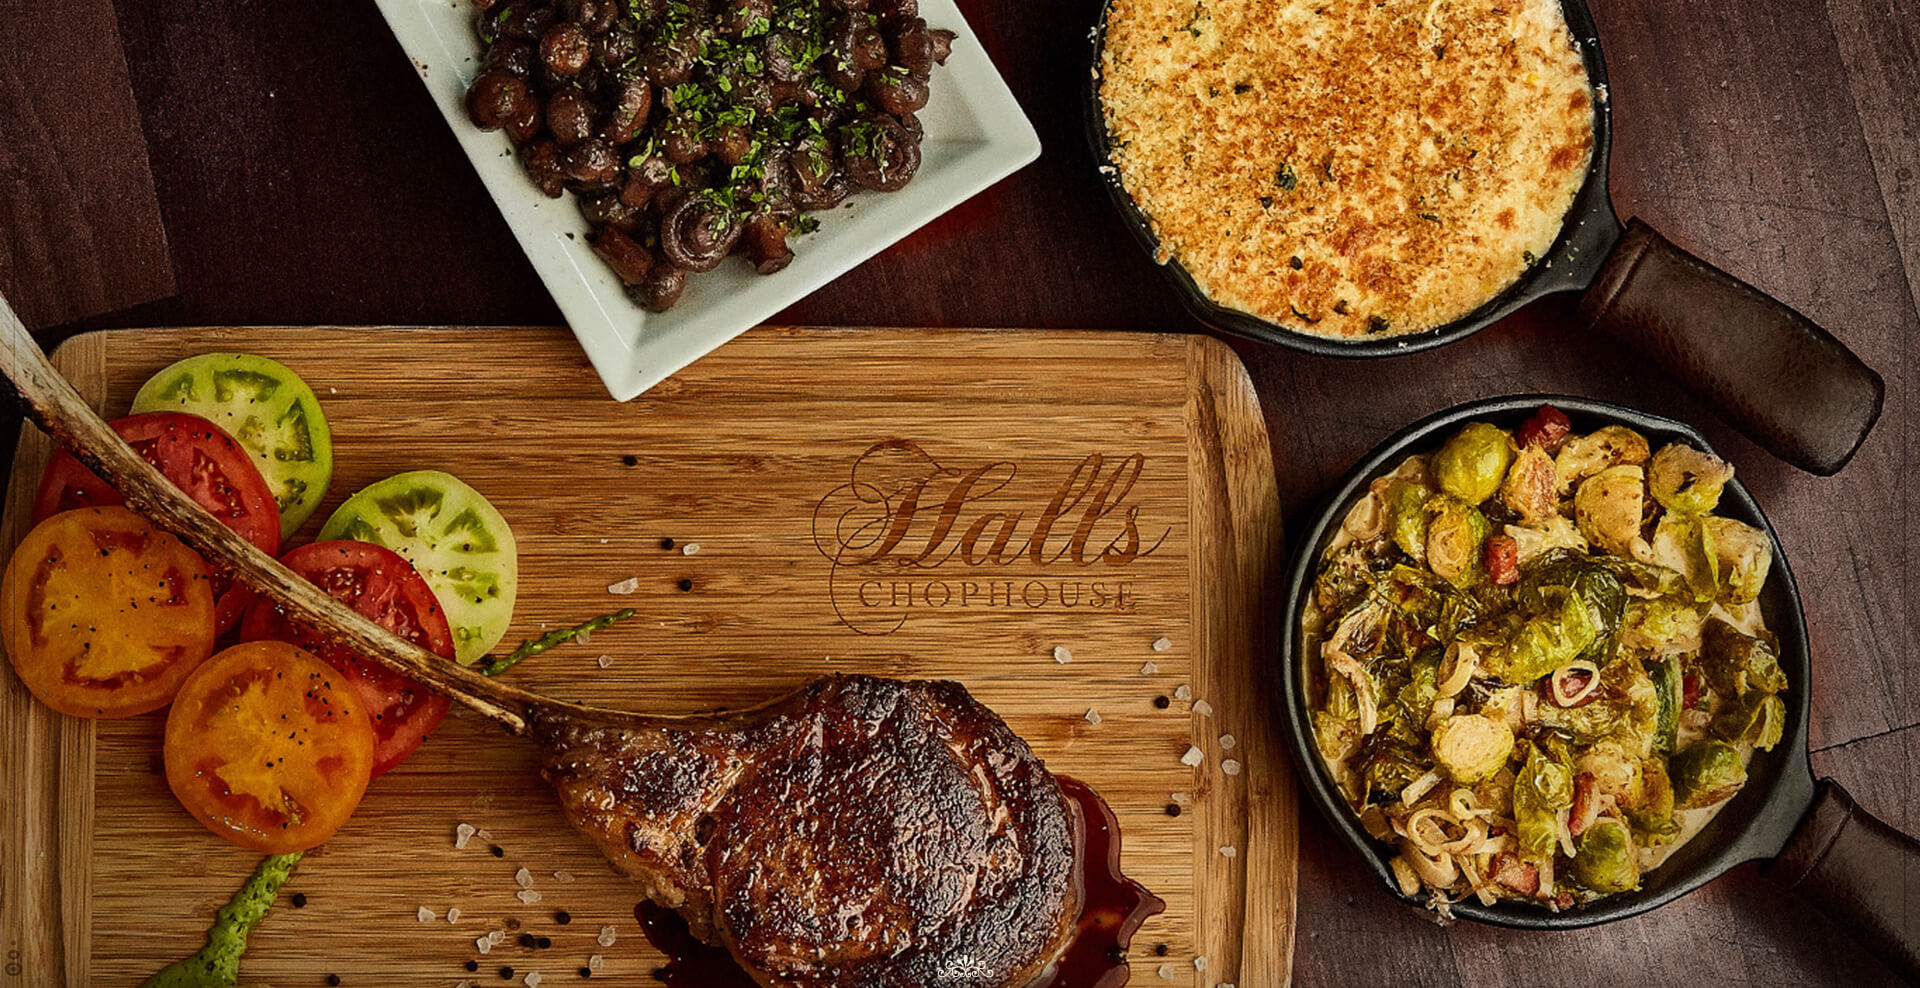 a cutting board labeled Halls Chophouse holds a large cut of meat, surrounded on the right by assorted side dishes